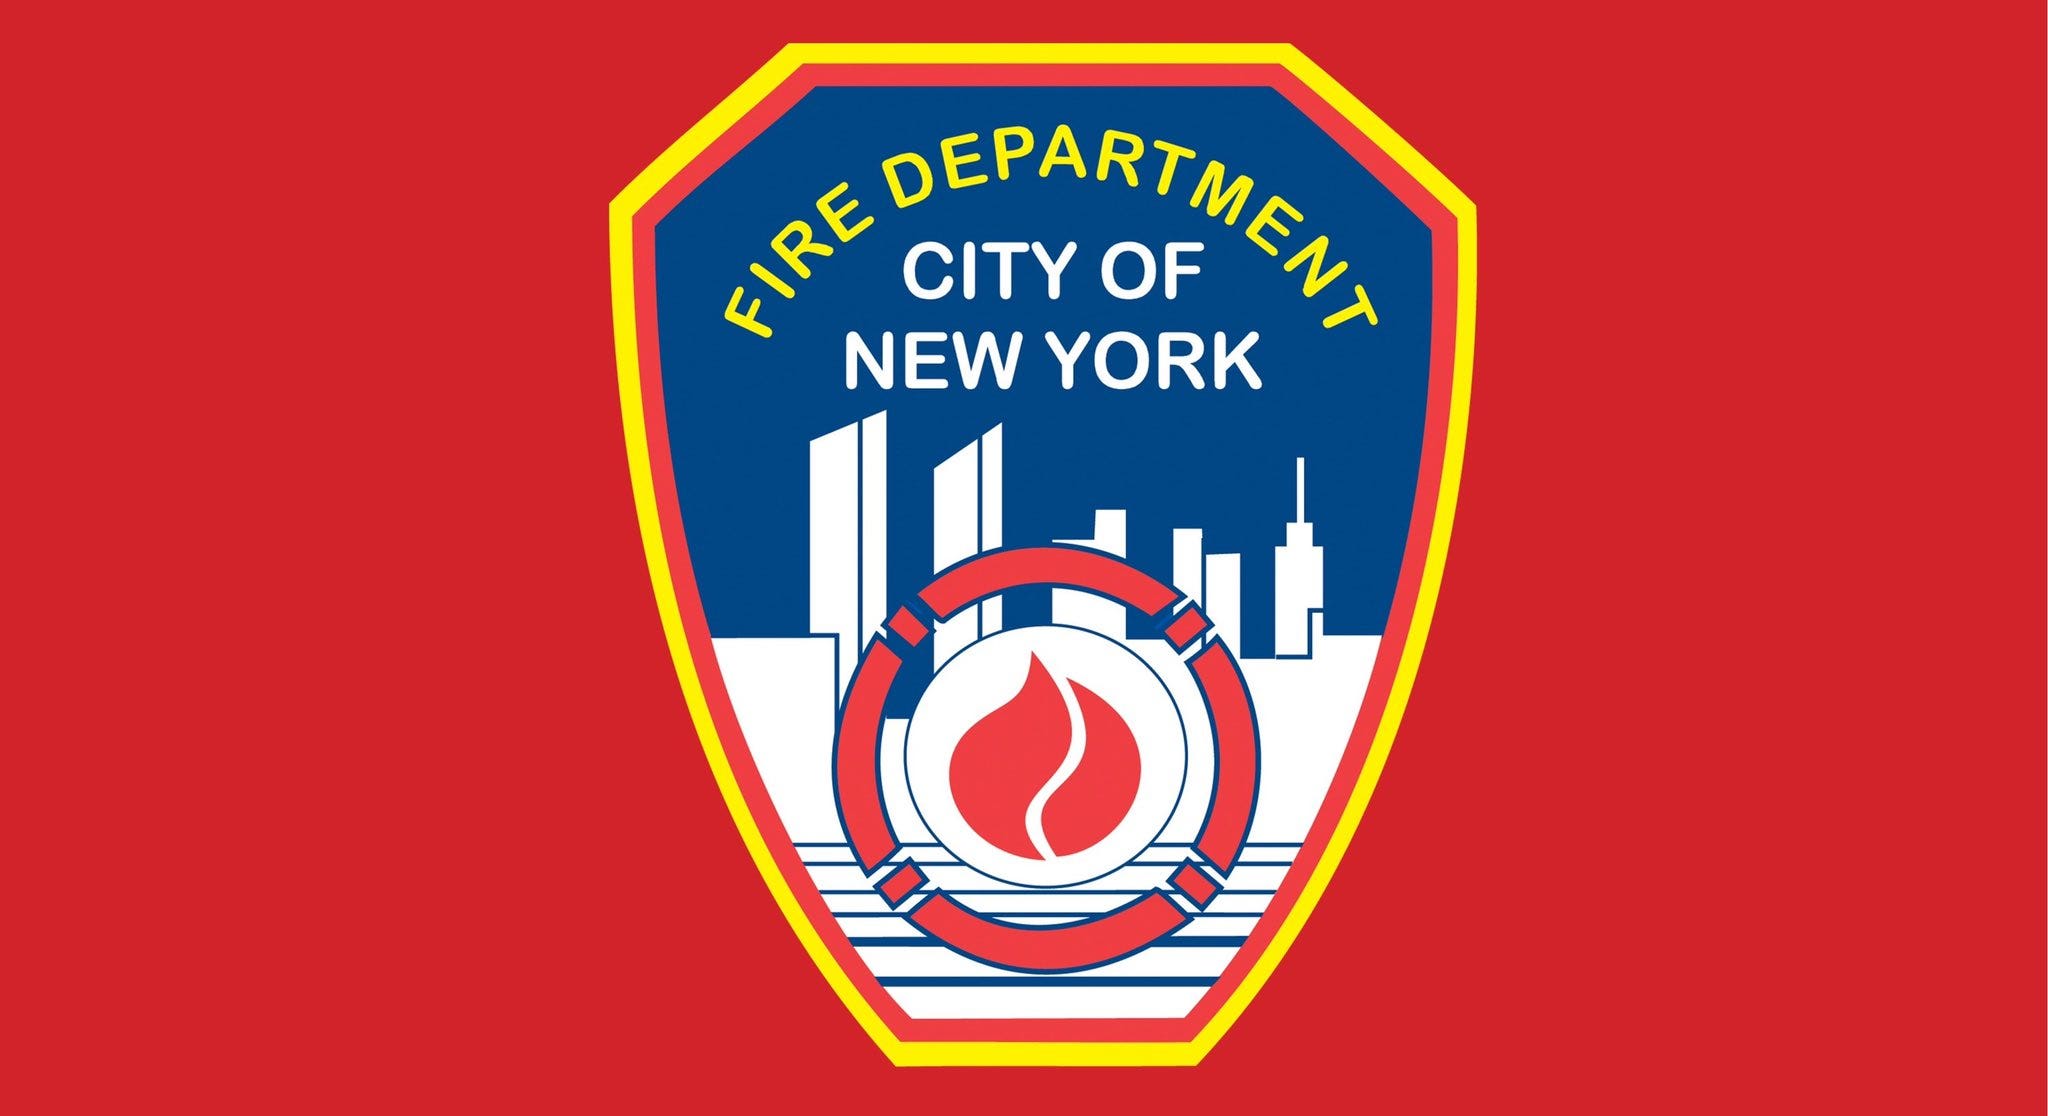 Report: 9 NYC firefighters suspended over racist messages